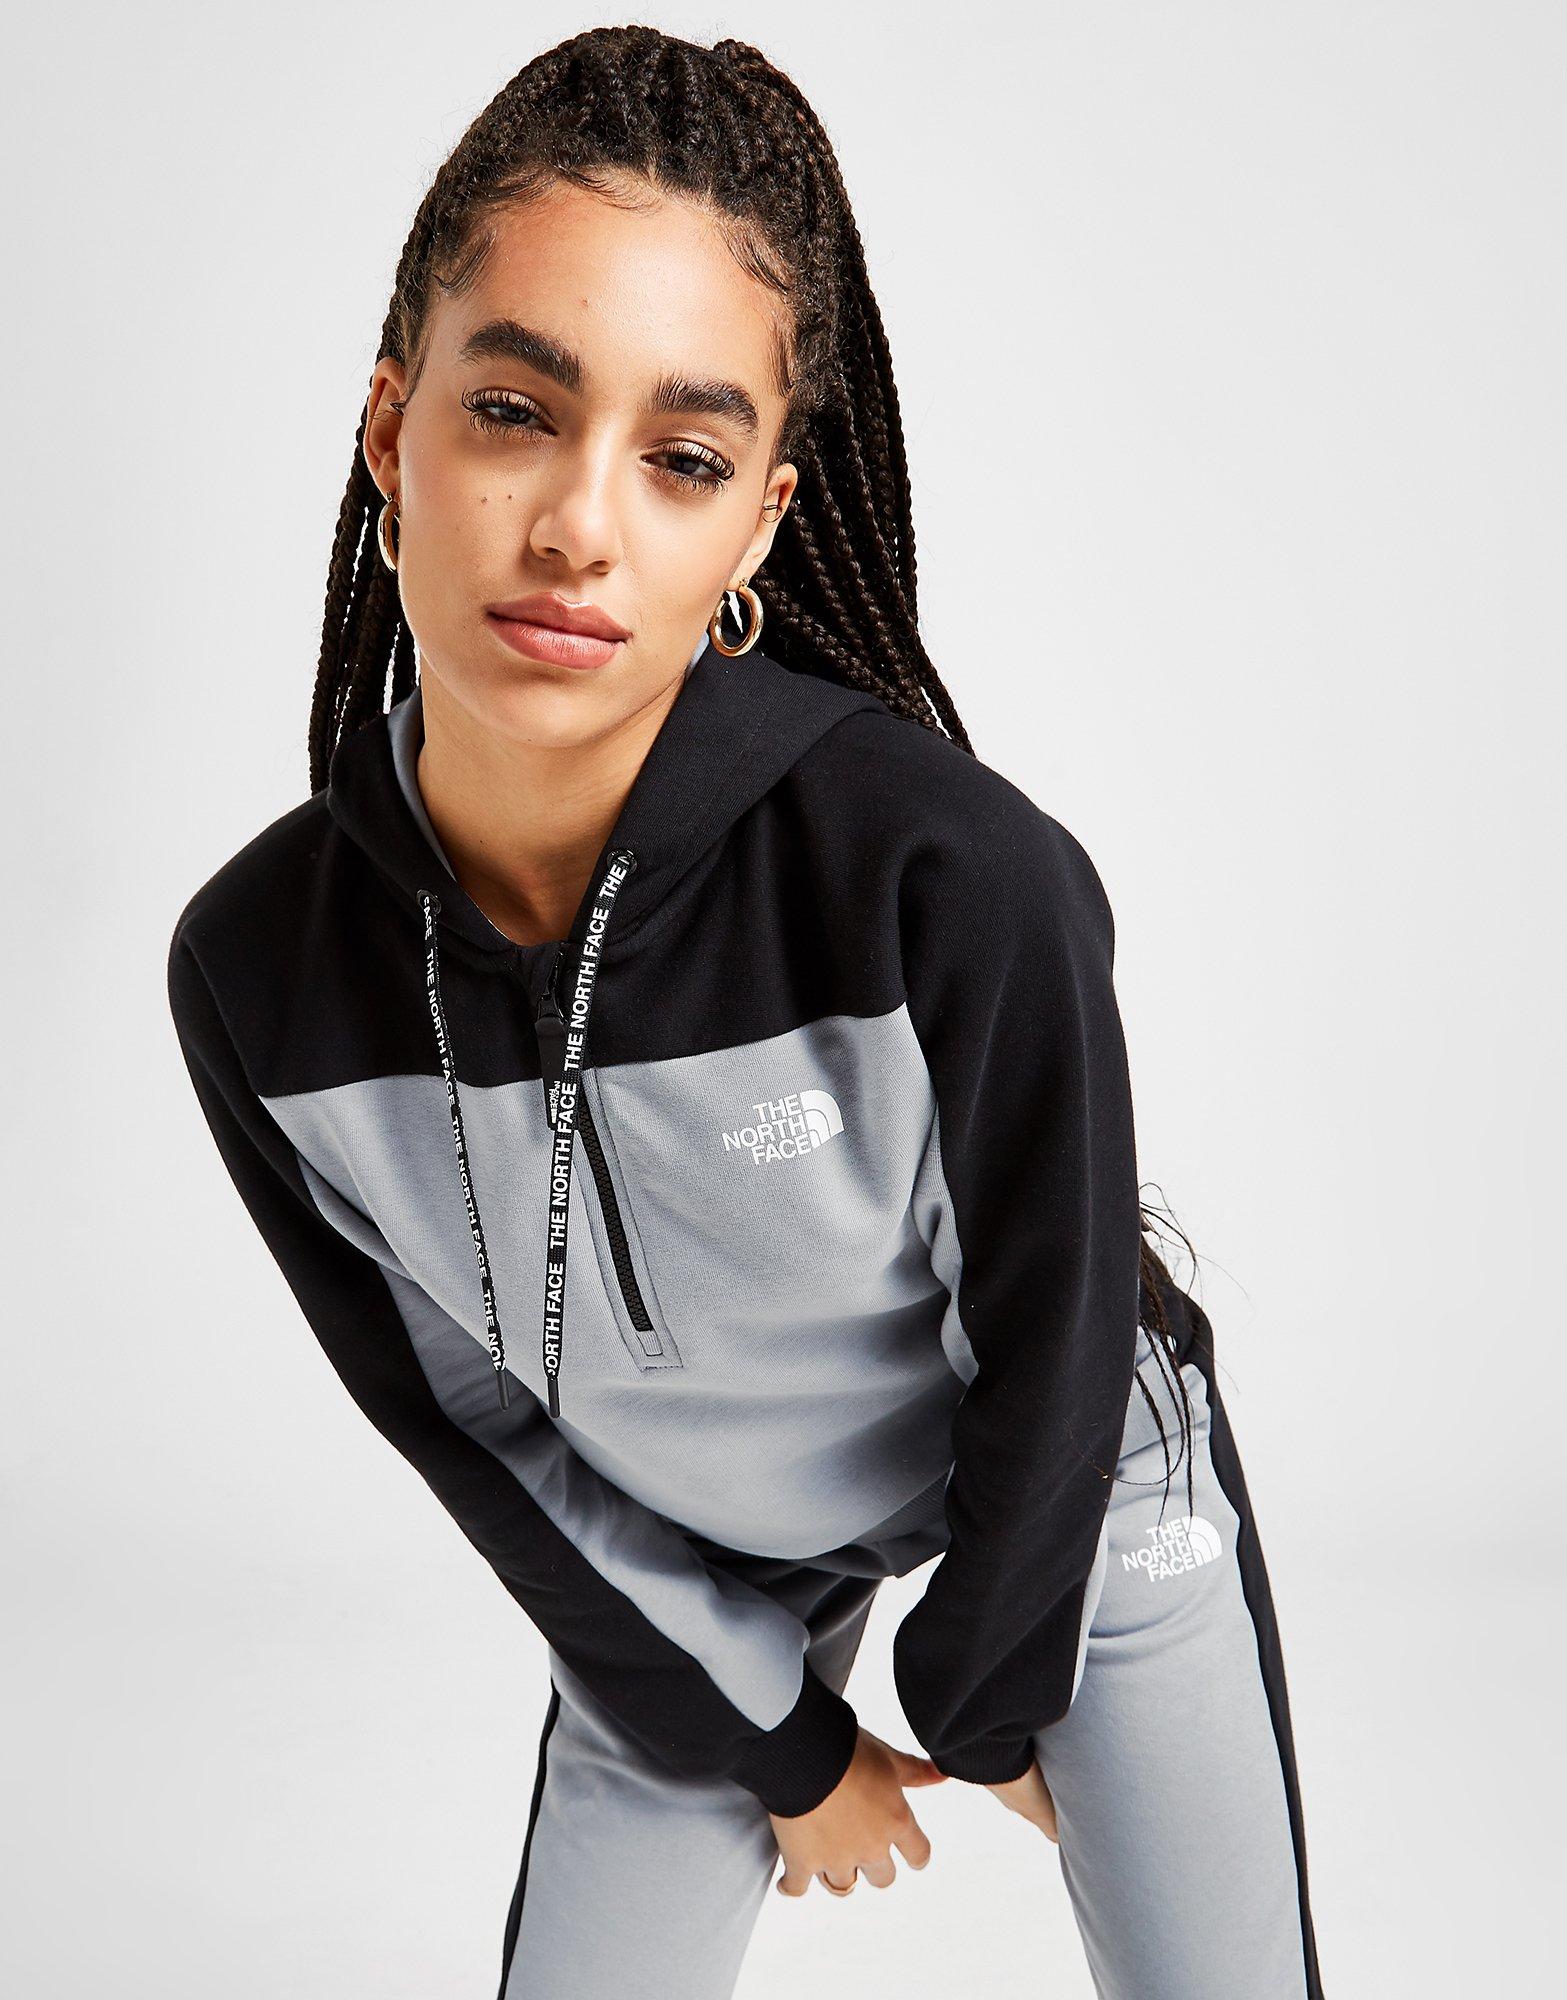 the north face tape crop hoodie